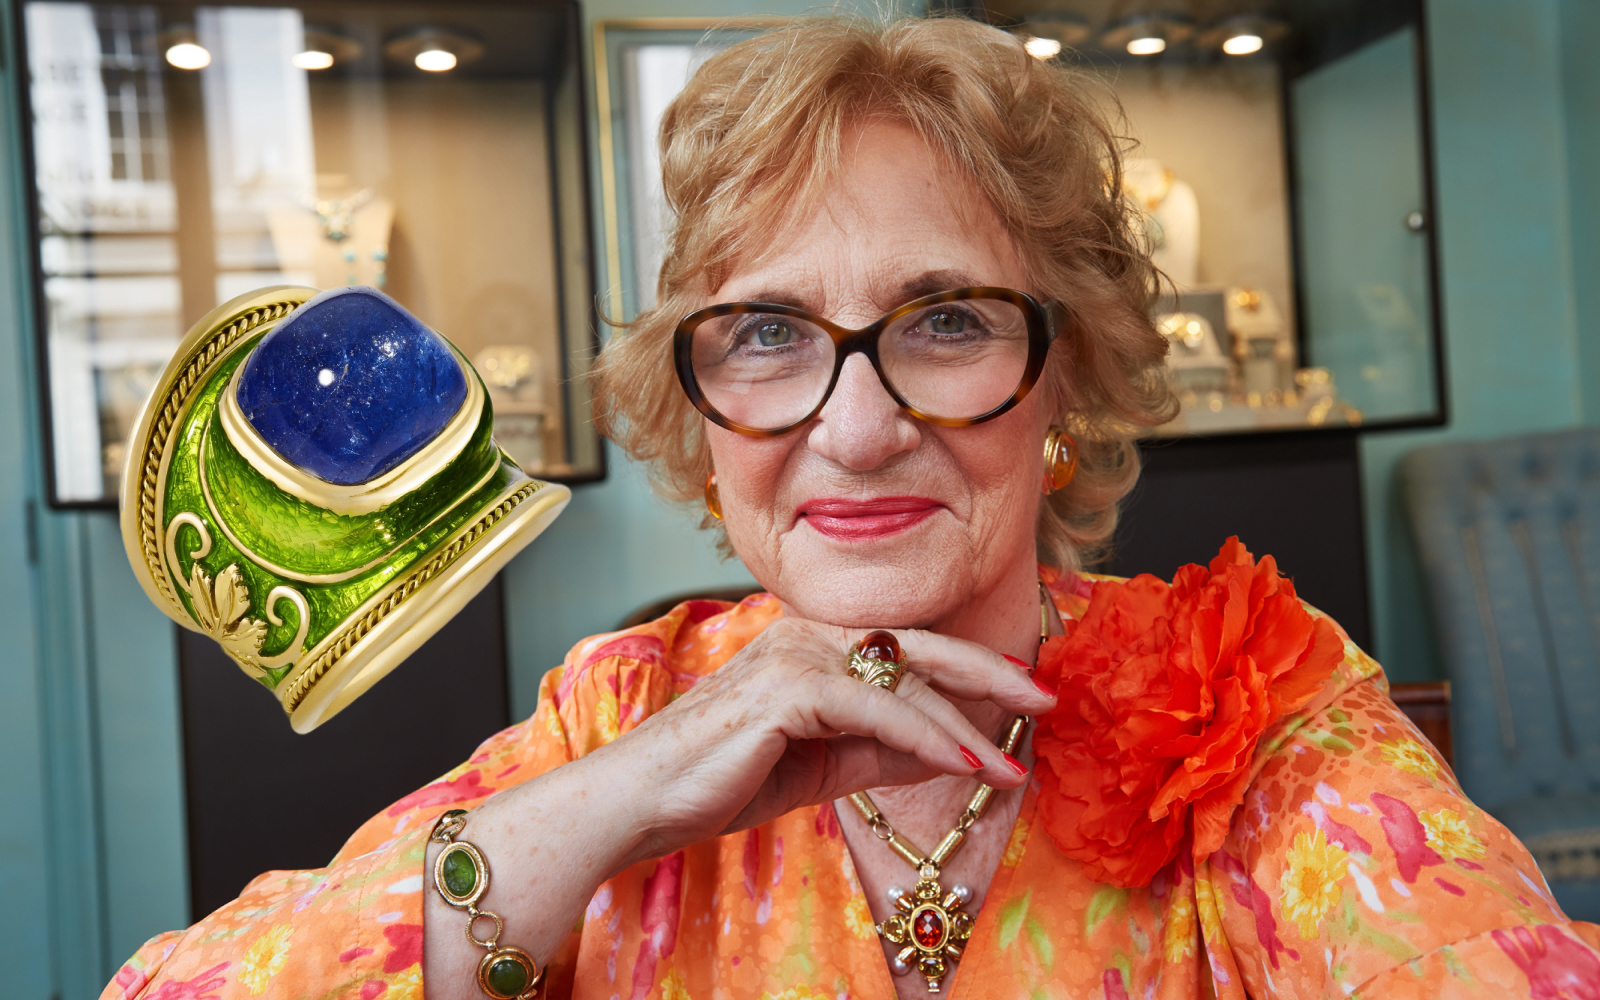 Elizabeth Gage MBE – Founder and Creative Director at Elizabeth Gage, wearing a selection of her own creations, alongside her Tanzanite Vine Leaf Tapered Templar ring in gold, lime-green enamel, featuring a 12.46-ct tanzanite 